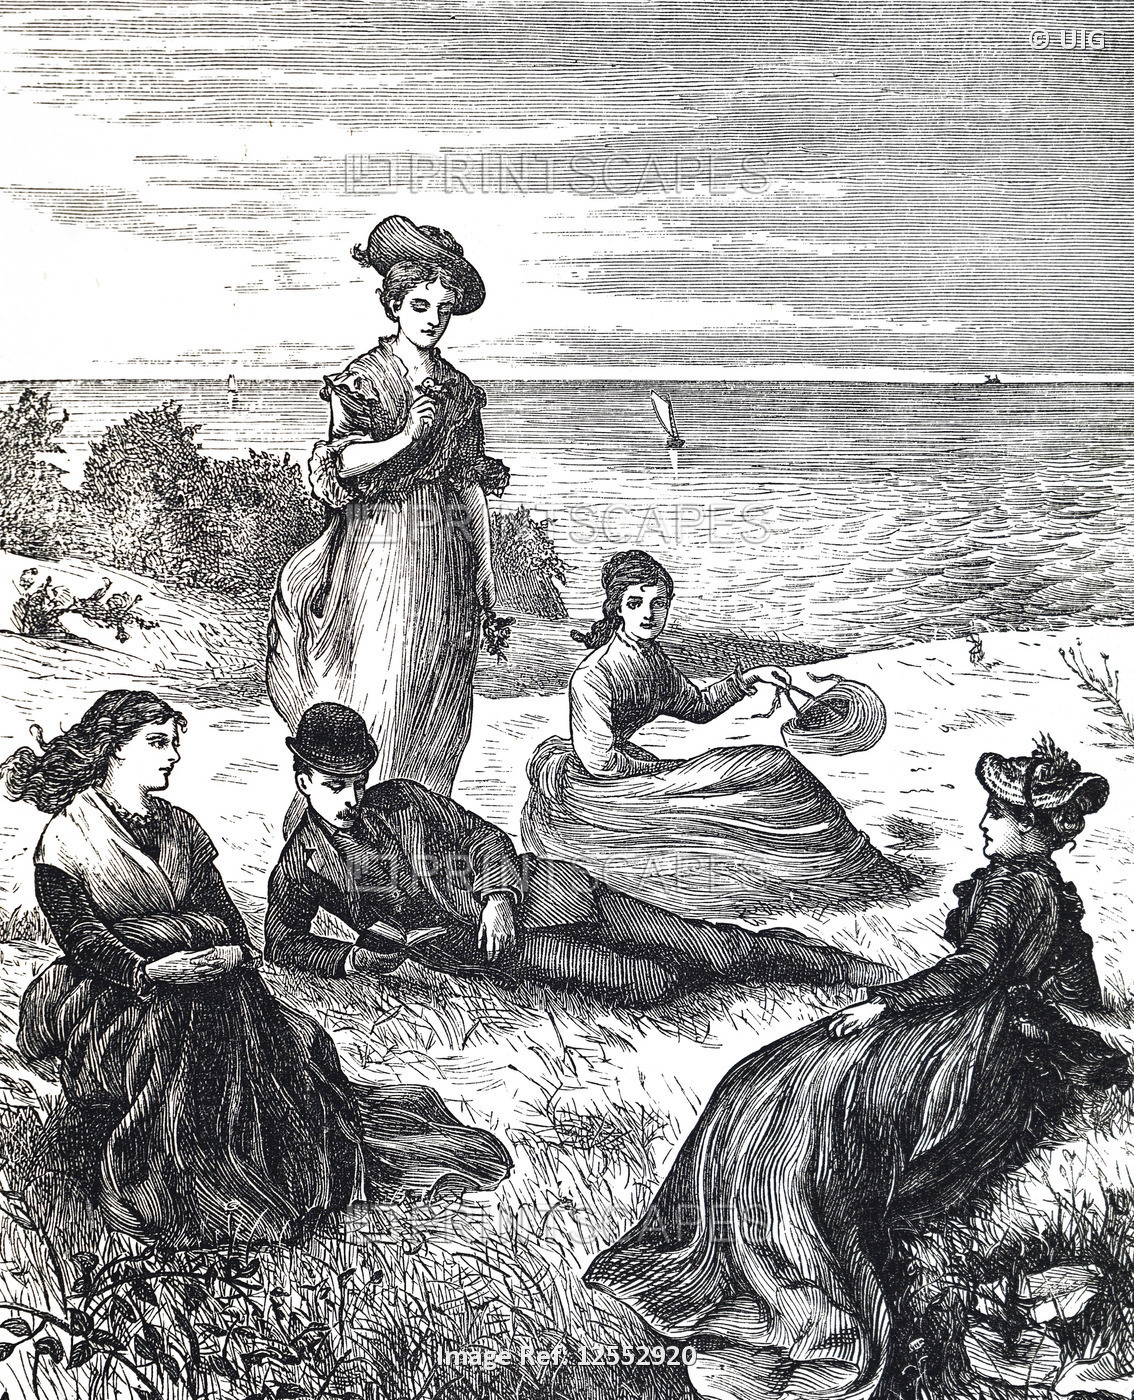 Illustration depicting a family relaxing on a grassy bank and looking out to the sea, 19th century